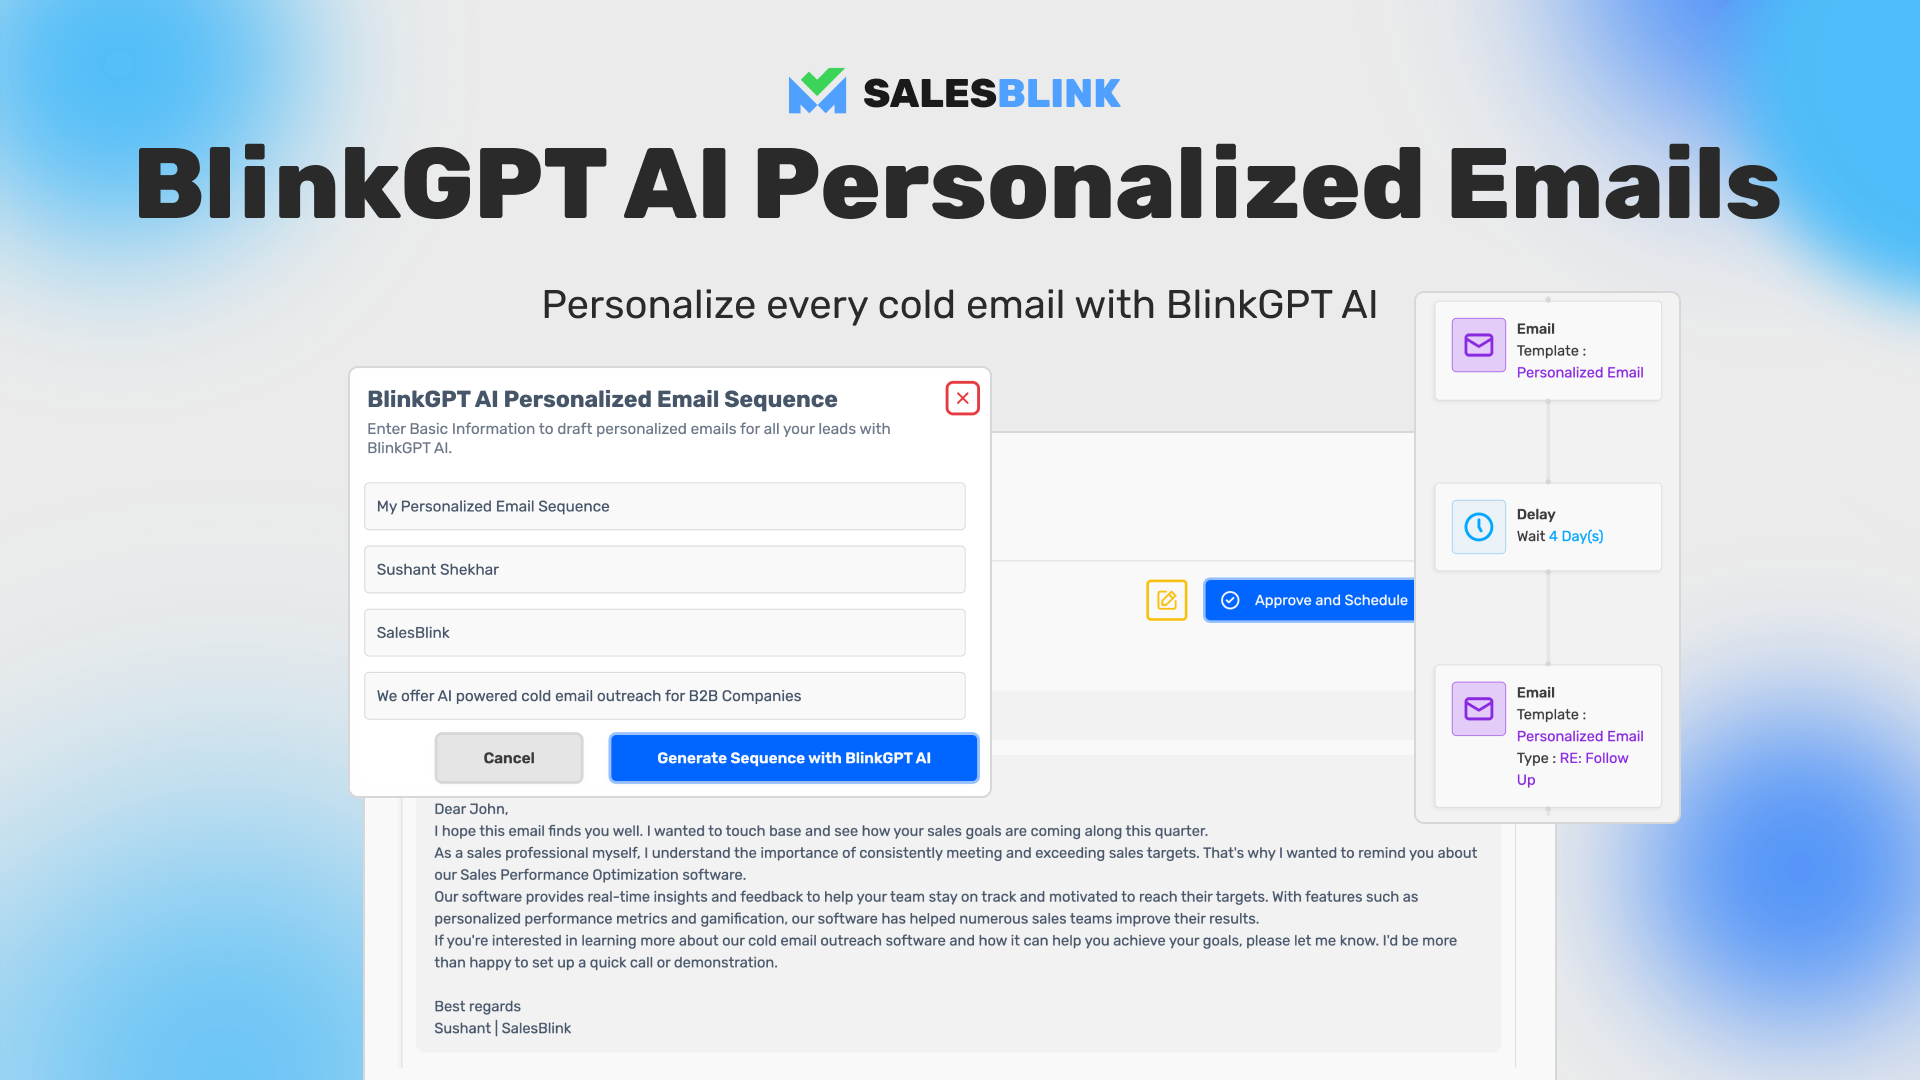 Personalize All Emails with BlinkGPT AI